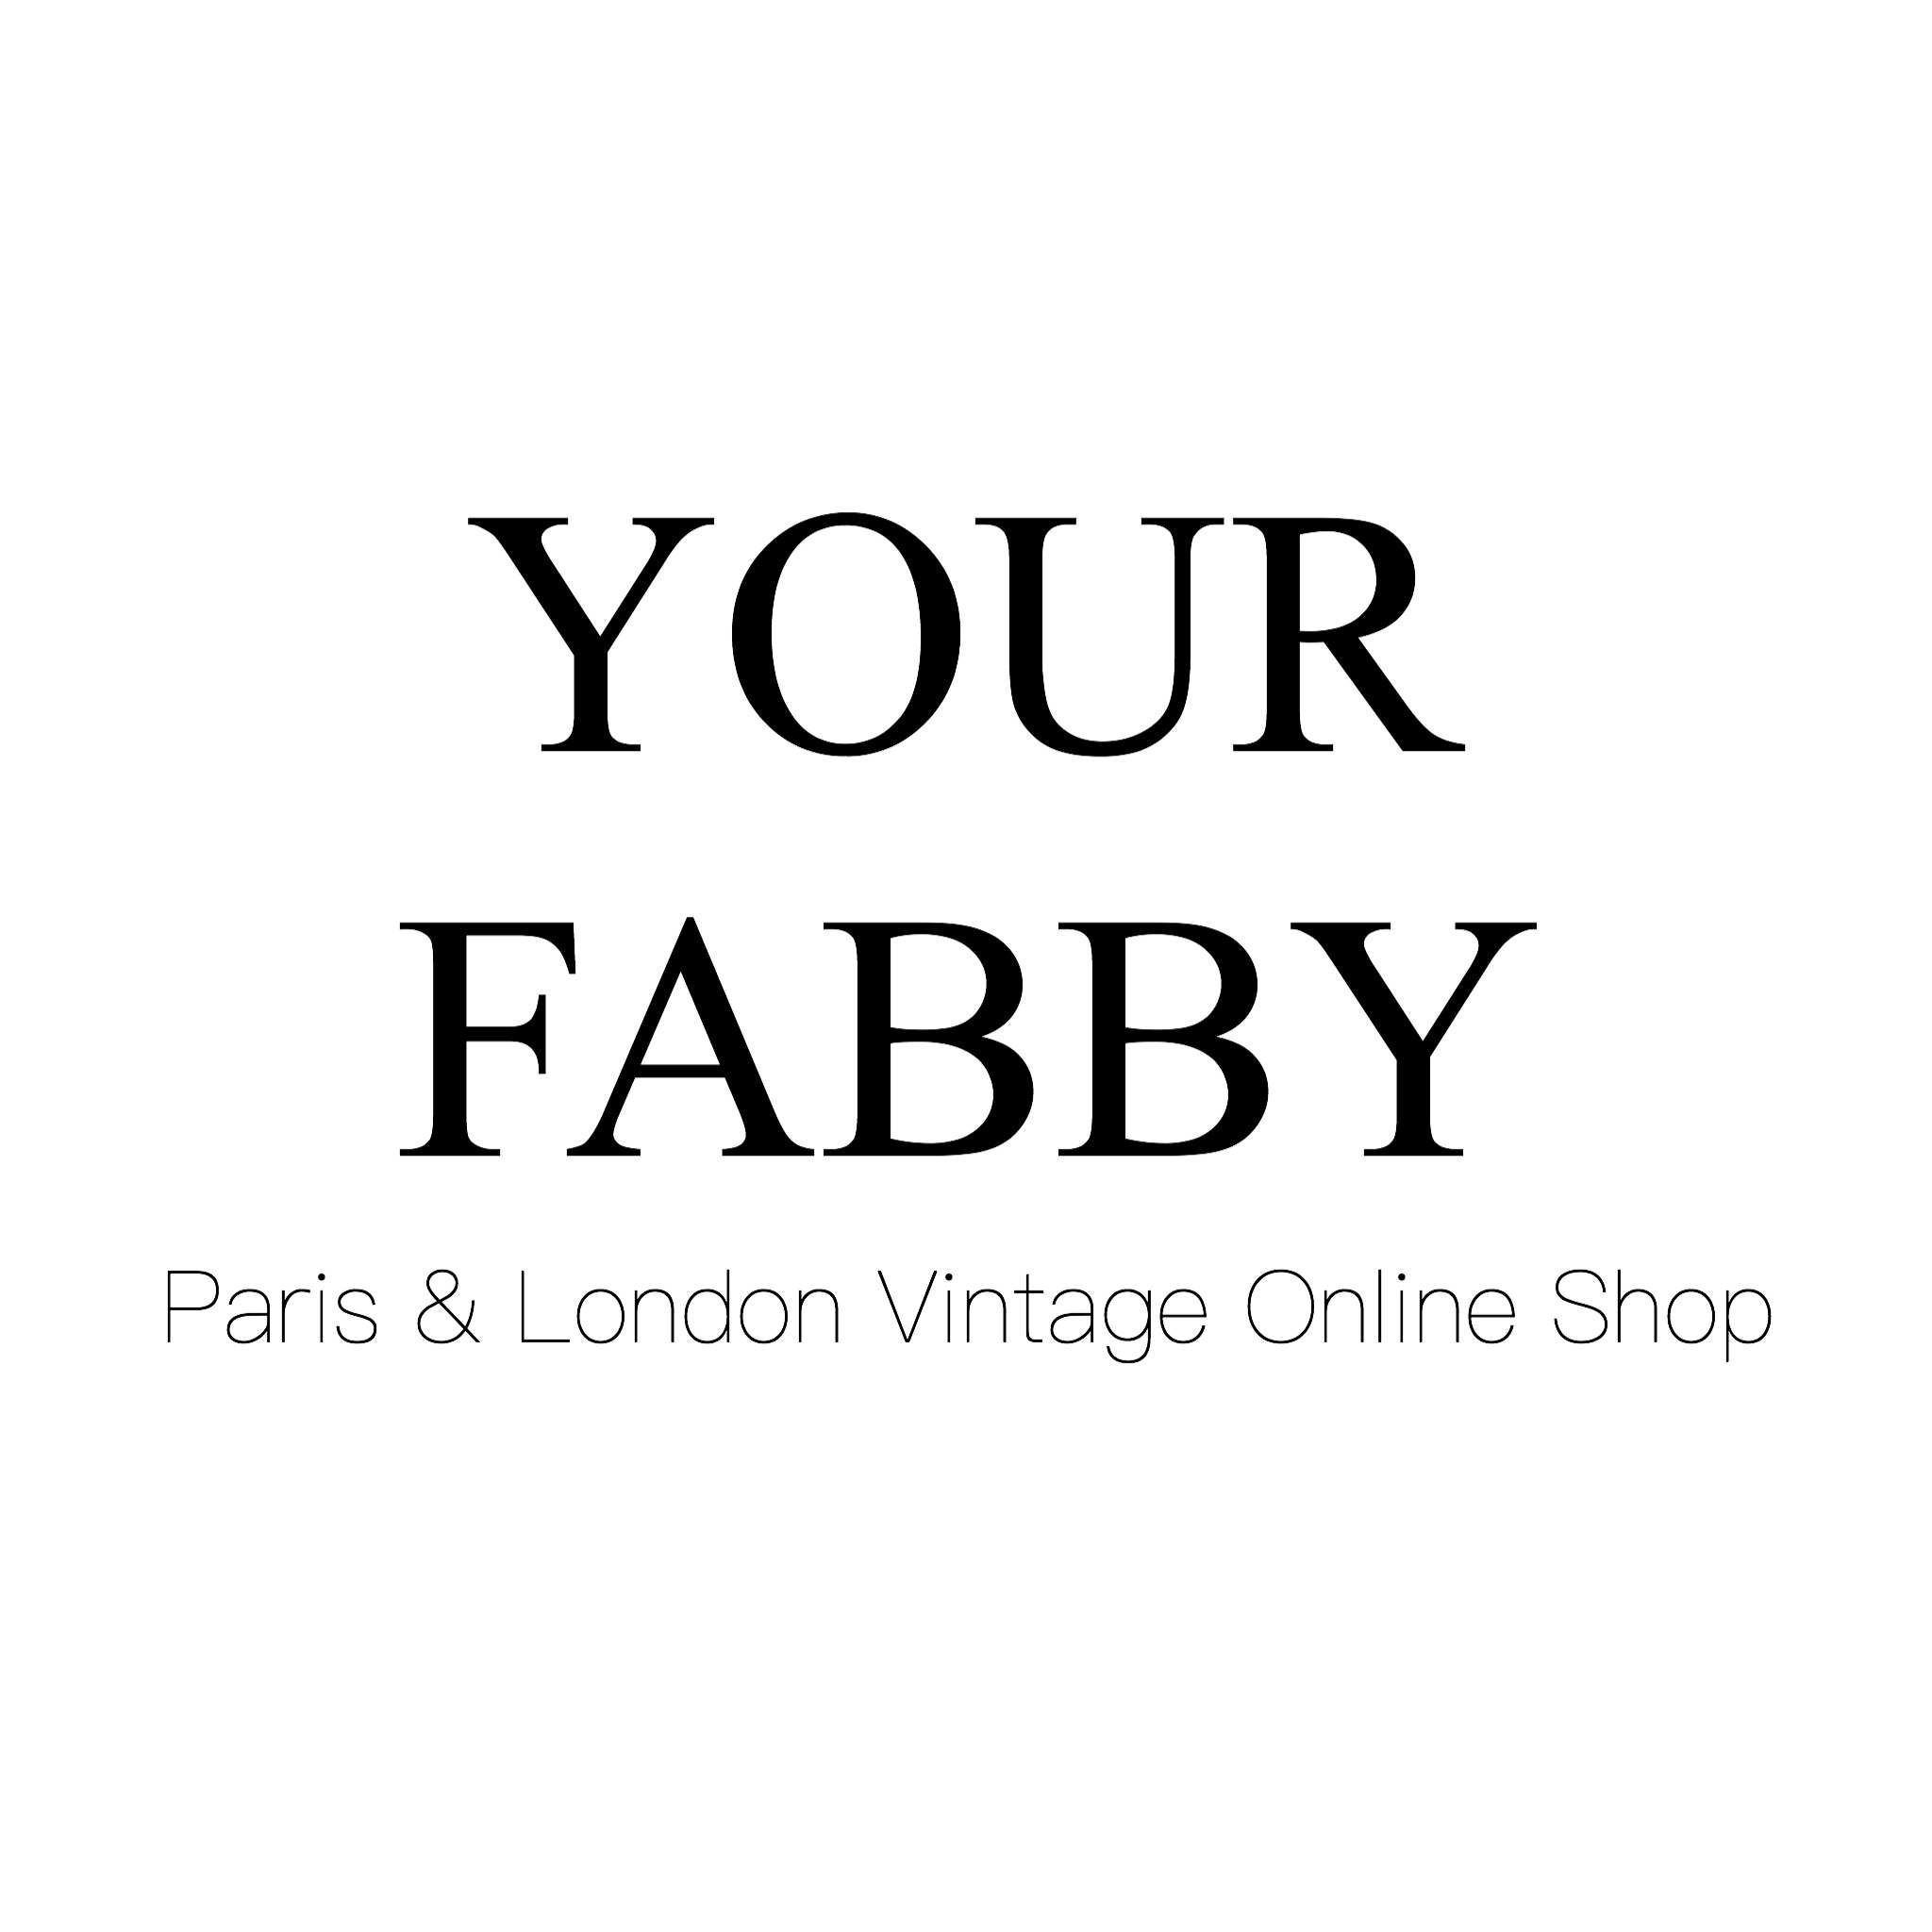 yourfabby